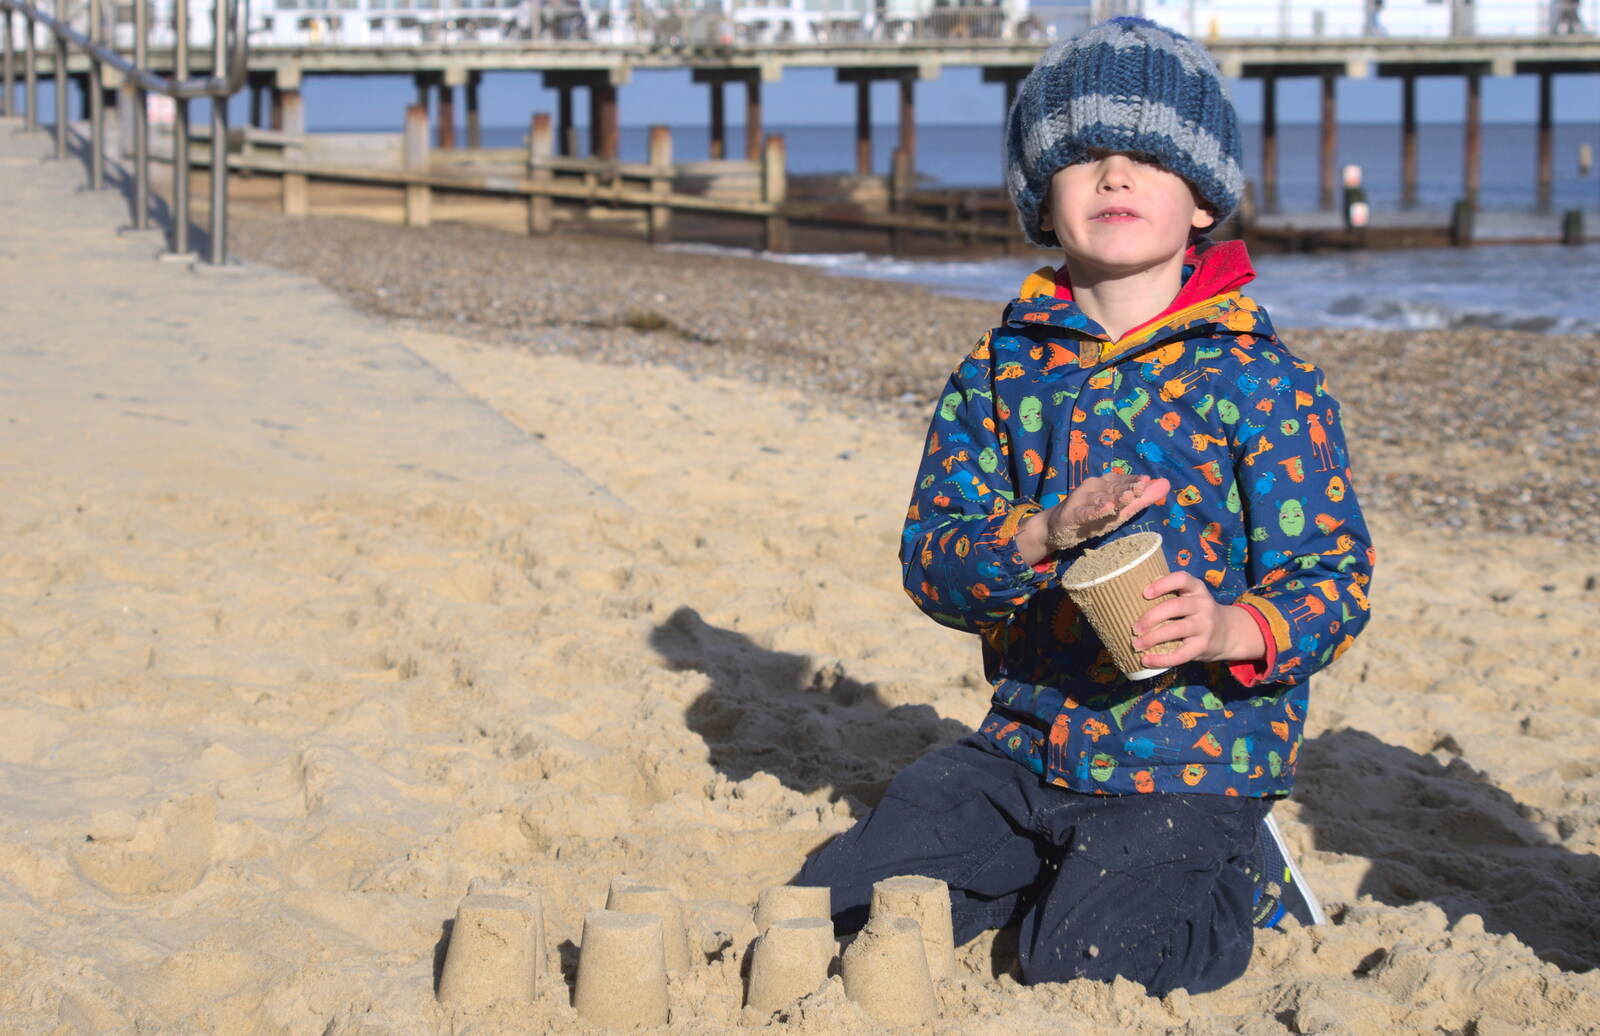 Harry looks up from his sandcastle building from A Trip to the Amusements, Southwold Pier, Southwold, Suffolk - 5th November 2017